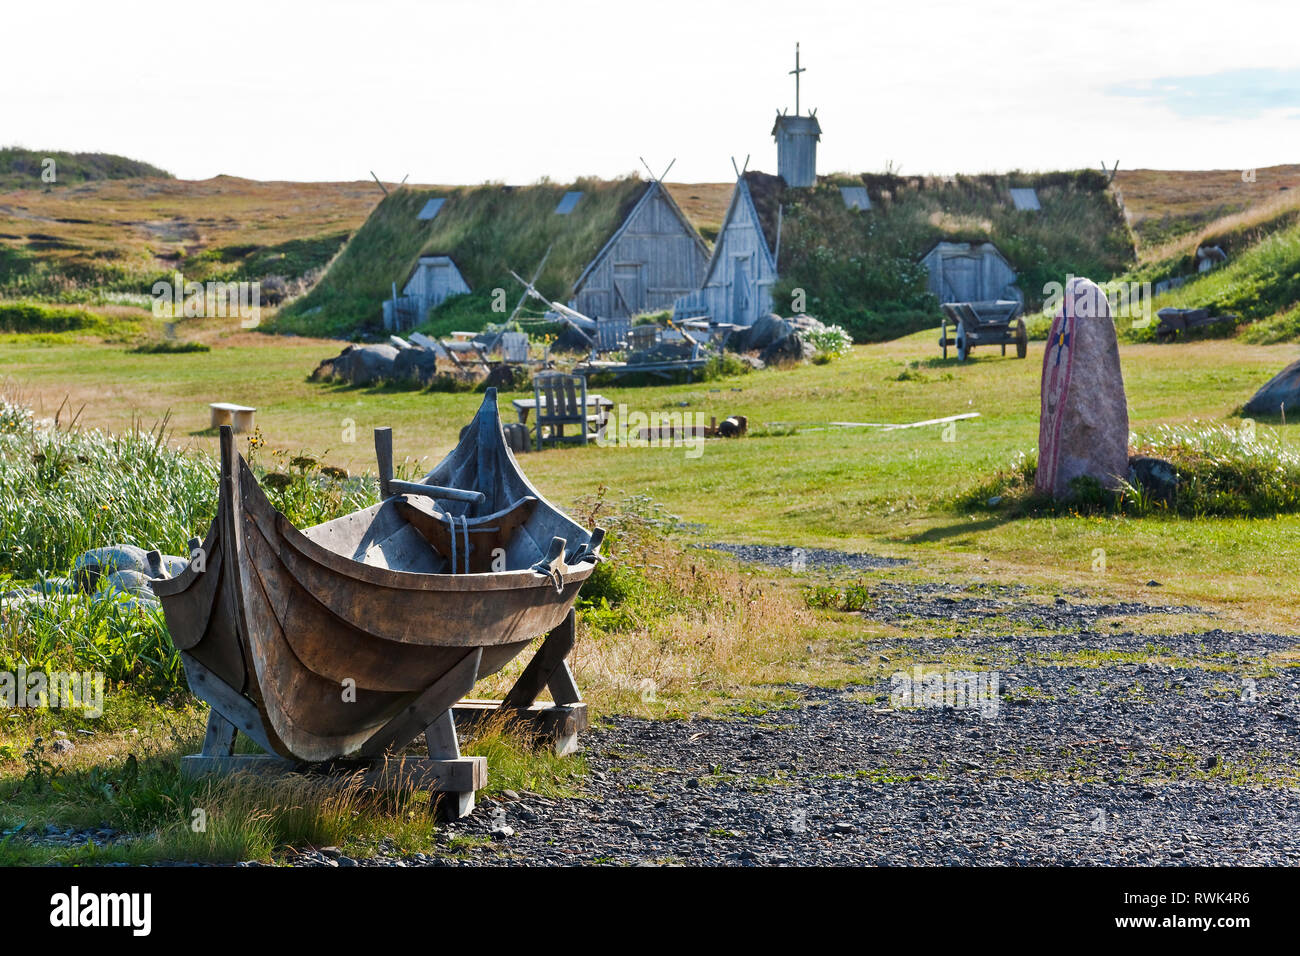 A Norse faering (i.e. a four-oar boat) behind which is a sod-covered church and a blacksmith shop at Norstead Viking Villange and Port of Trade, L'Anse au Meadows, Newfoundland, Canada Stock Photo